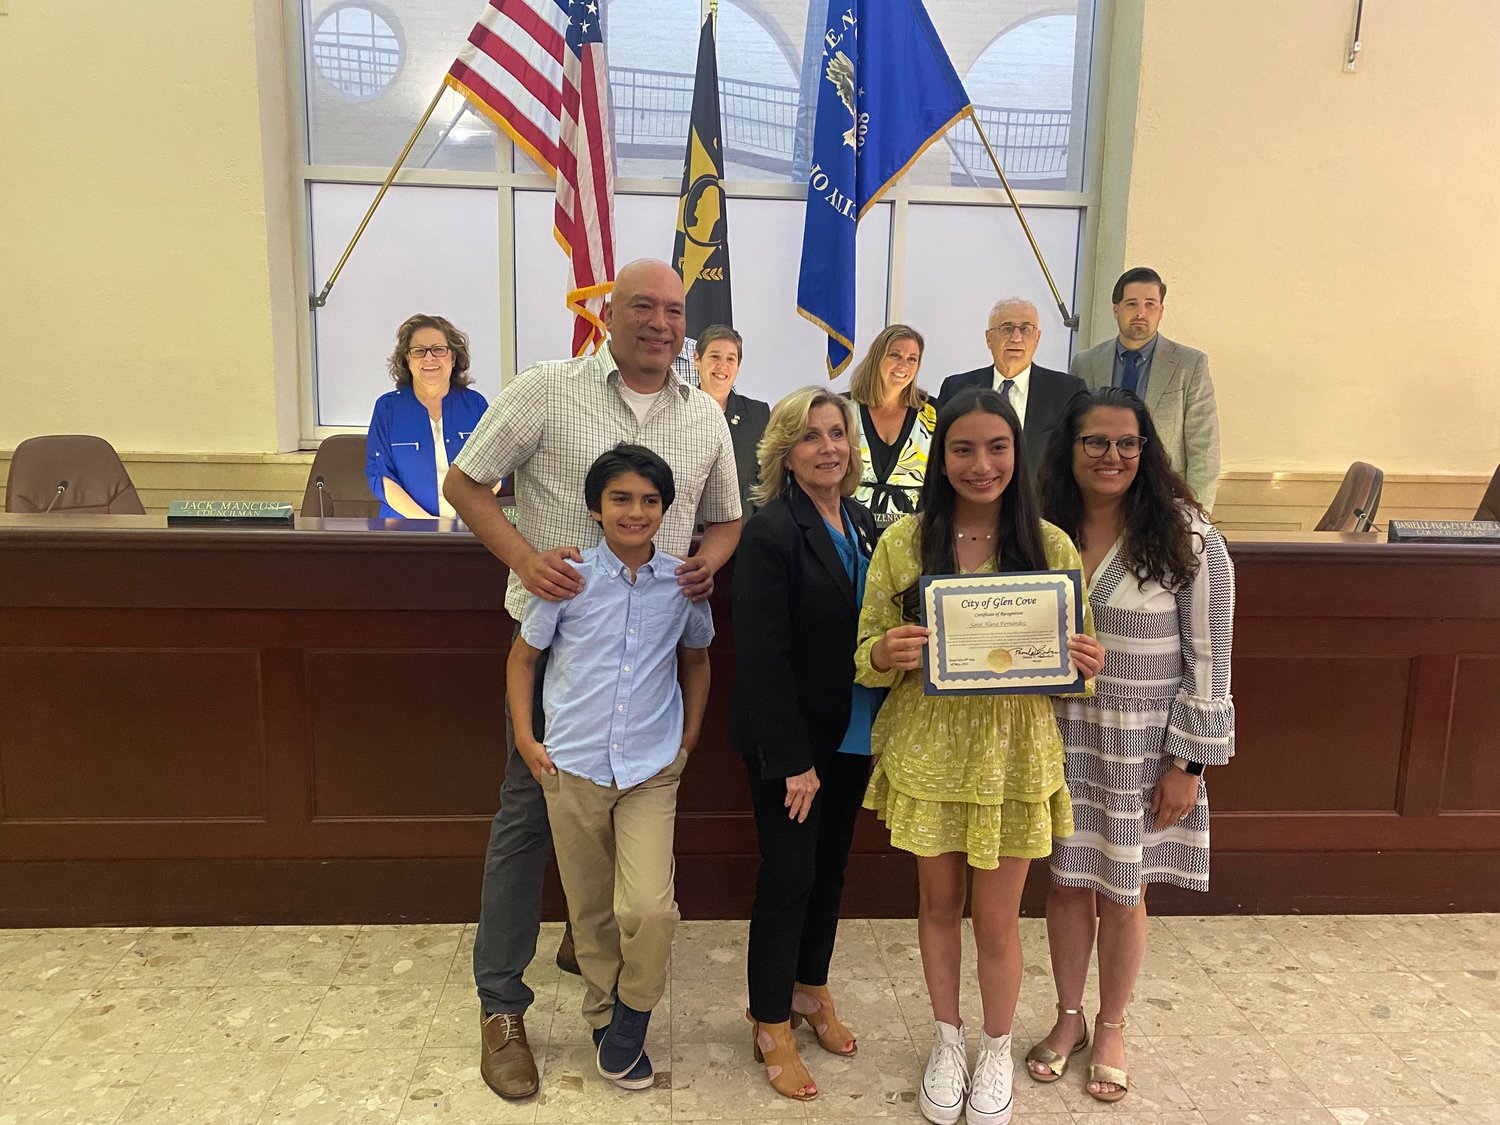 Sarai Fernandez, holding certificate, received a citation from Mayor Pamela Panzenbeck on May 24 for donating $1,800 to the Glen Cove Youth Services and Recreation Department to help underprivileged children take participate in the city’s youth programs.